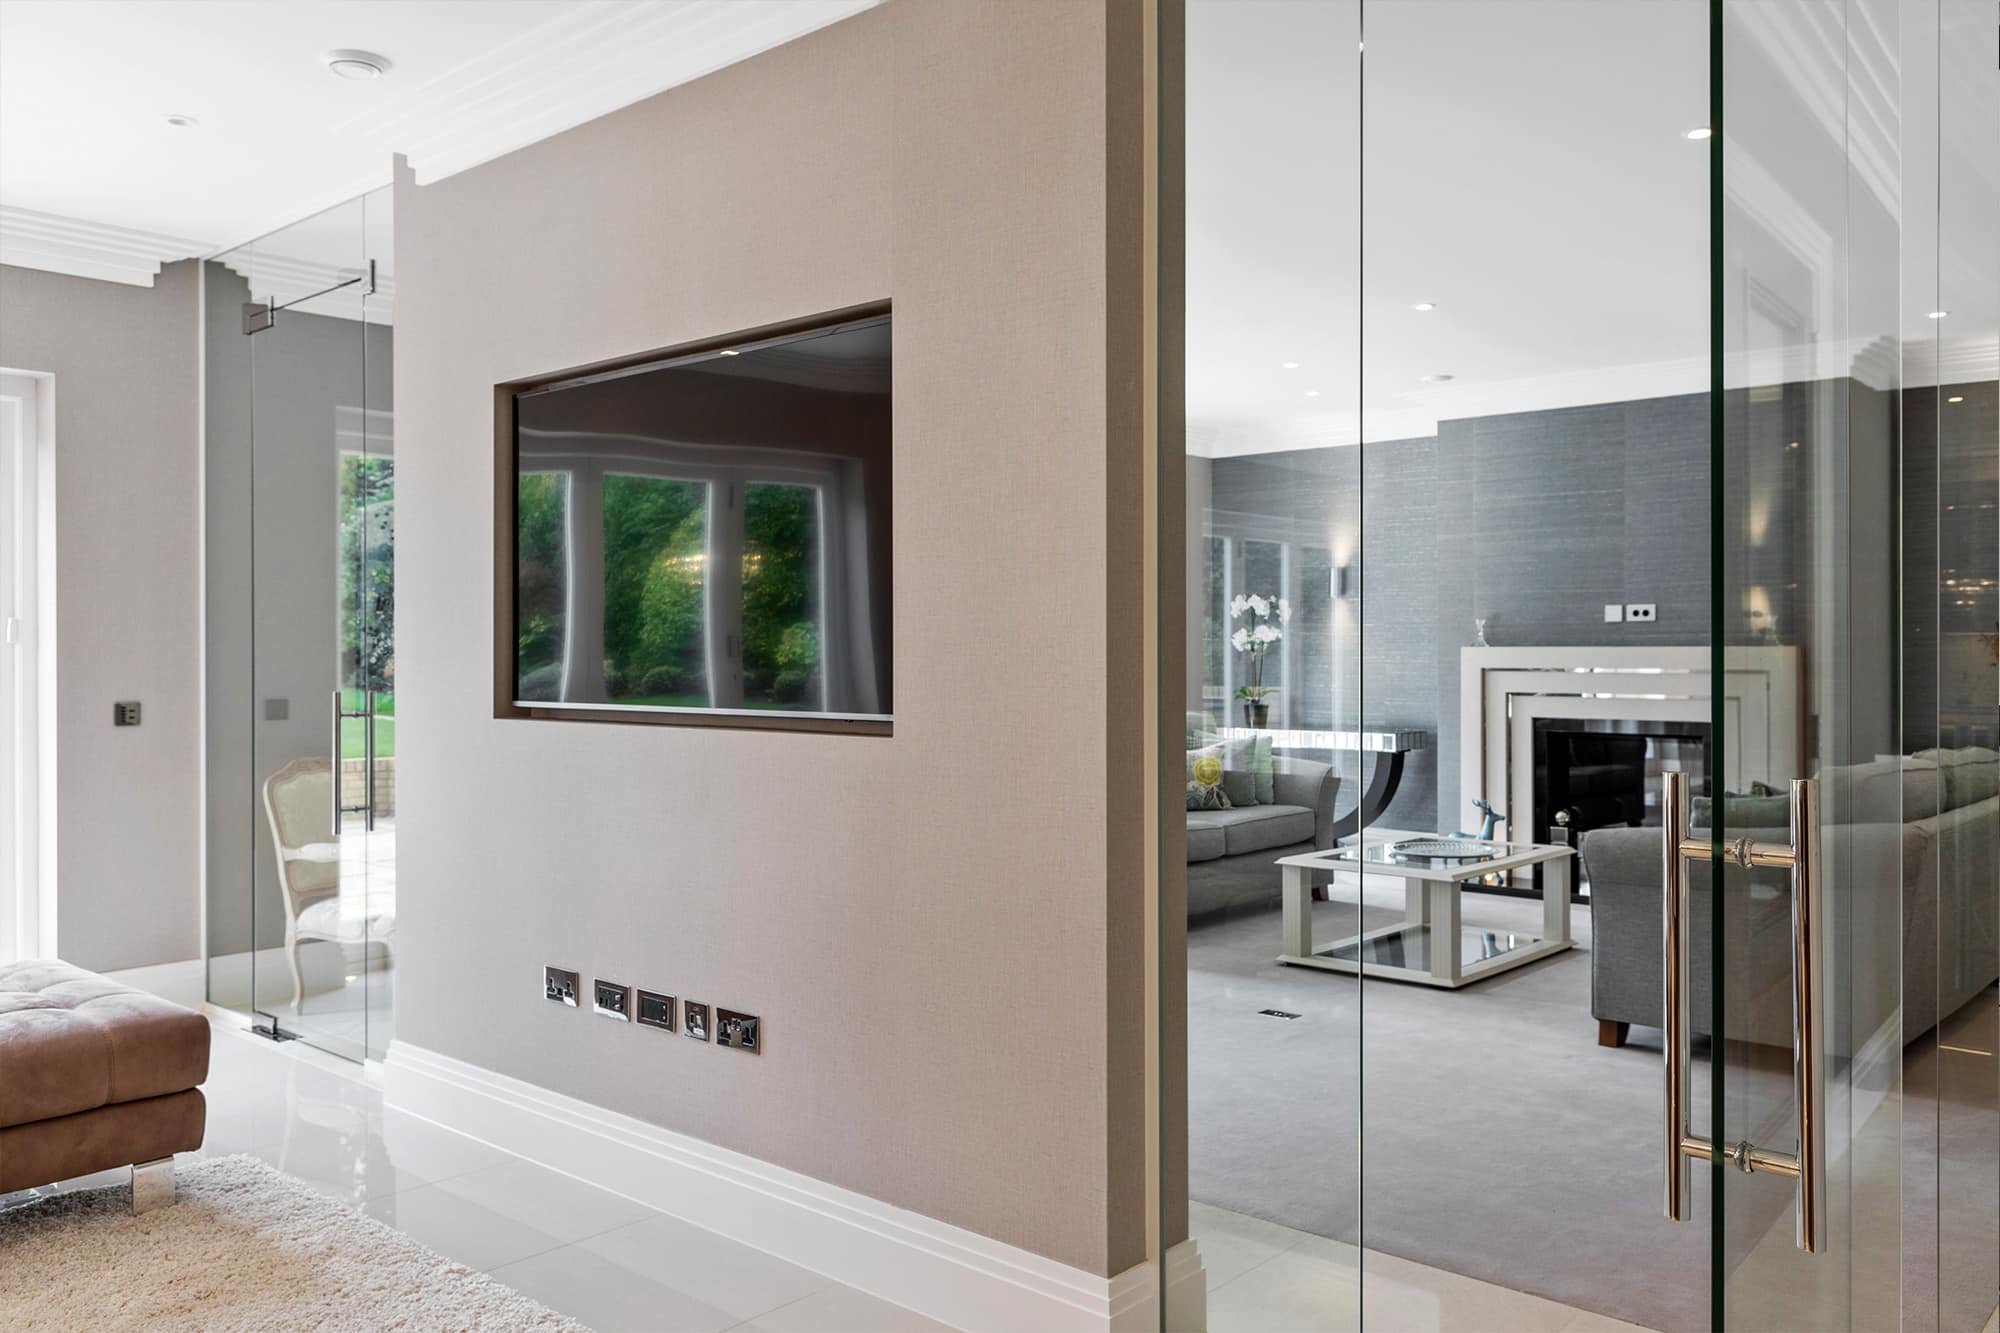 Bespoke Architecture & Interiors from Luxury Property Developers Octagon